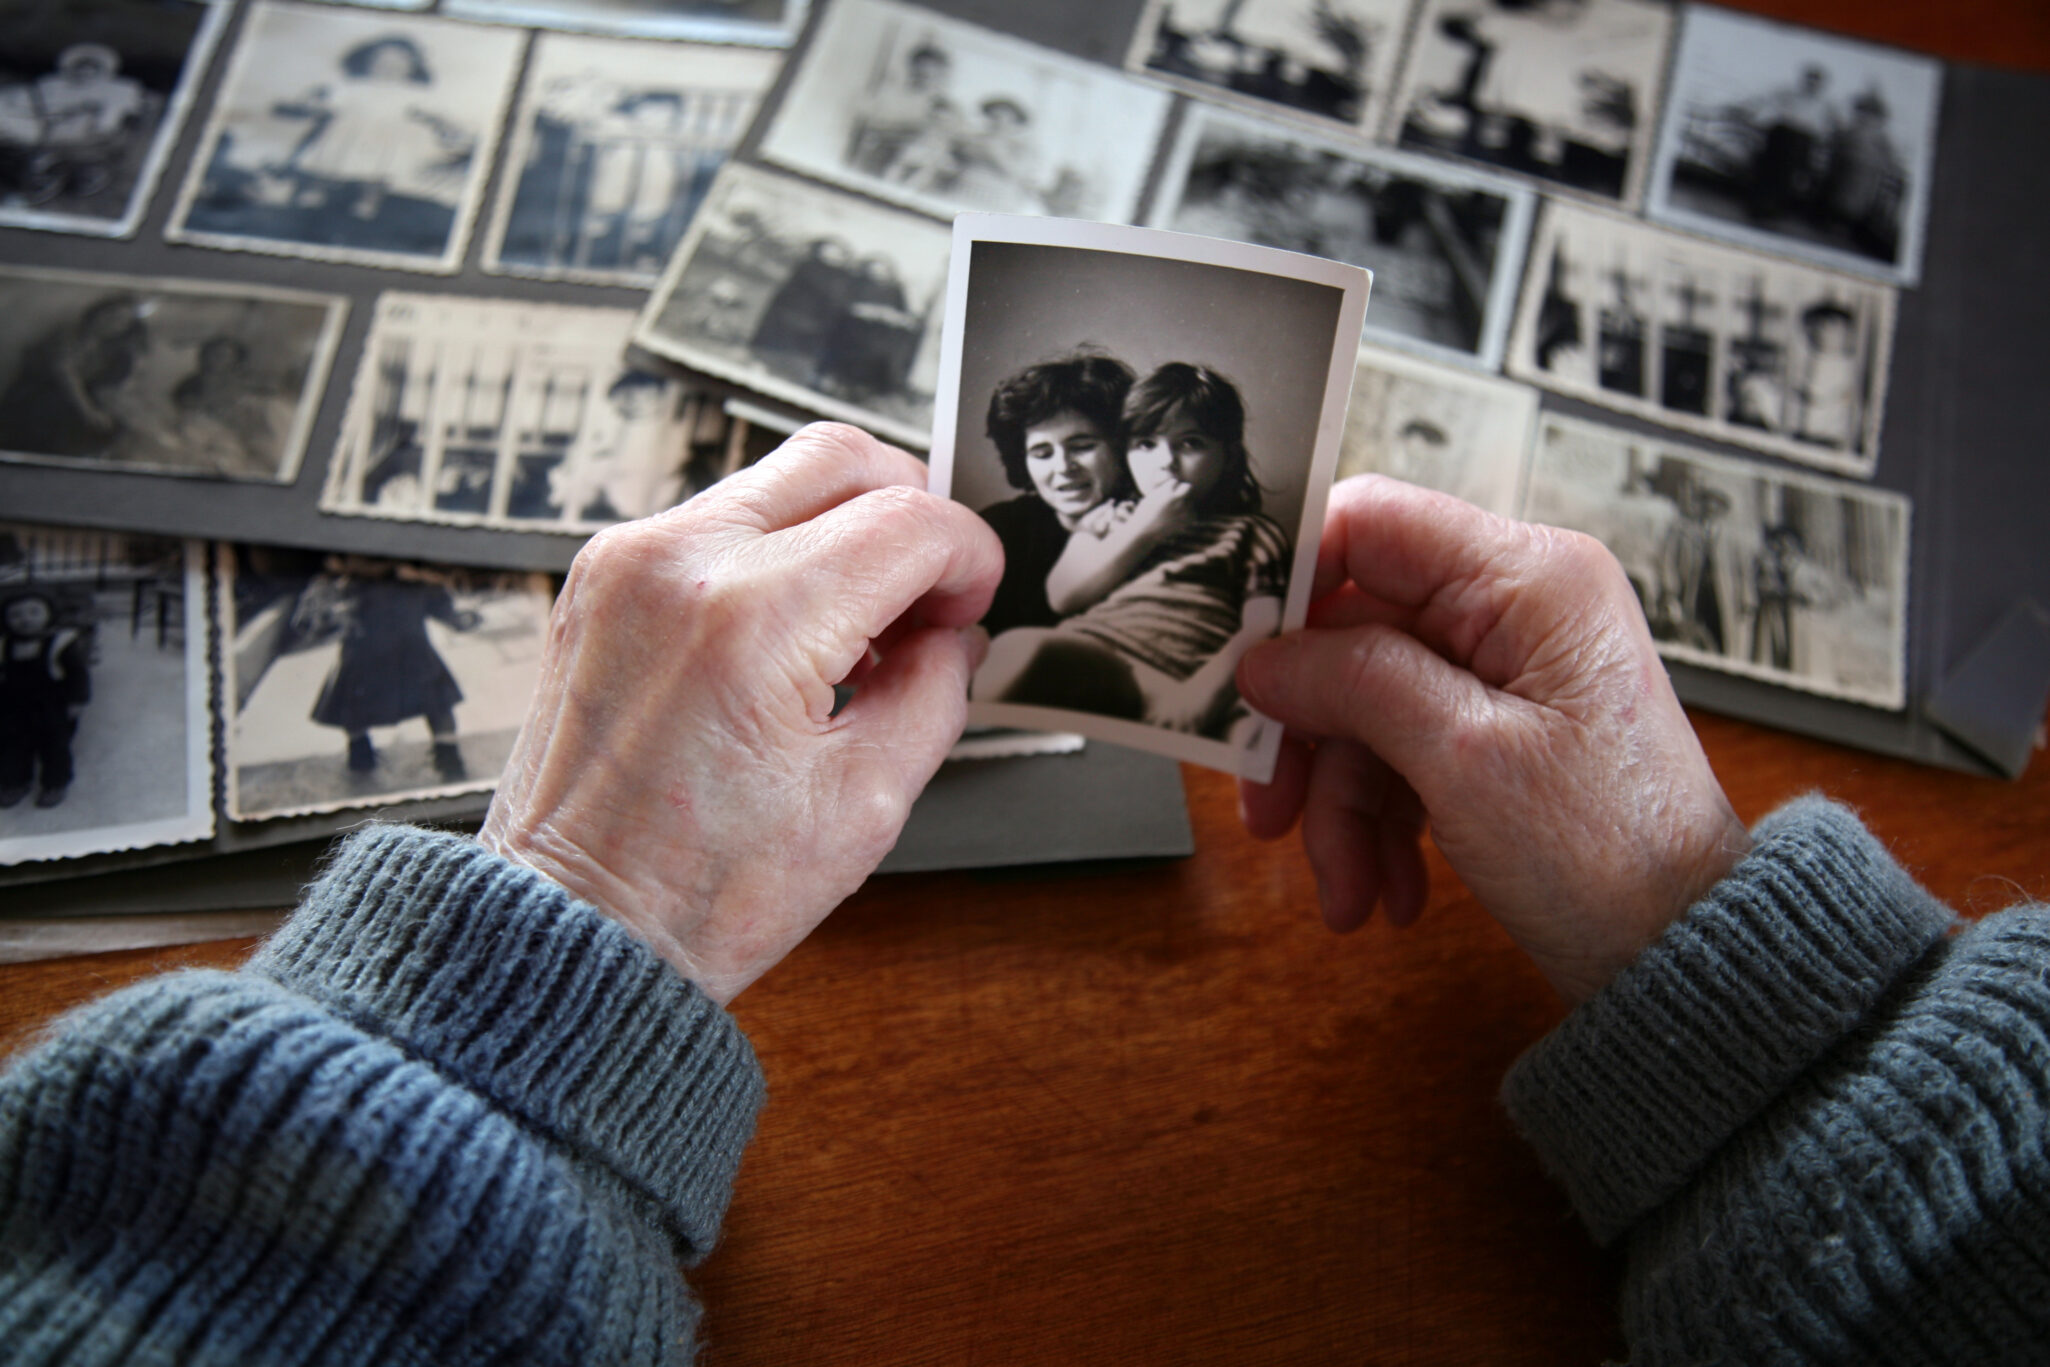 Focus on the hands of an elderly person holding black and white photos while looking at a photo album